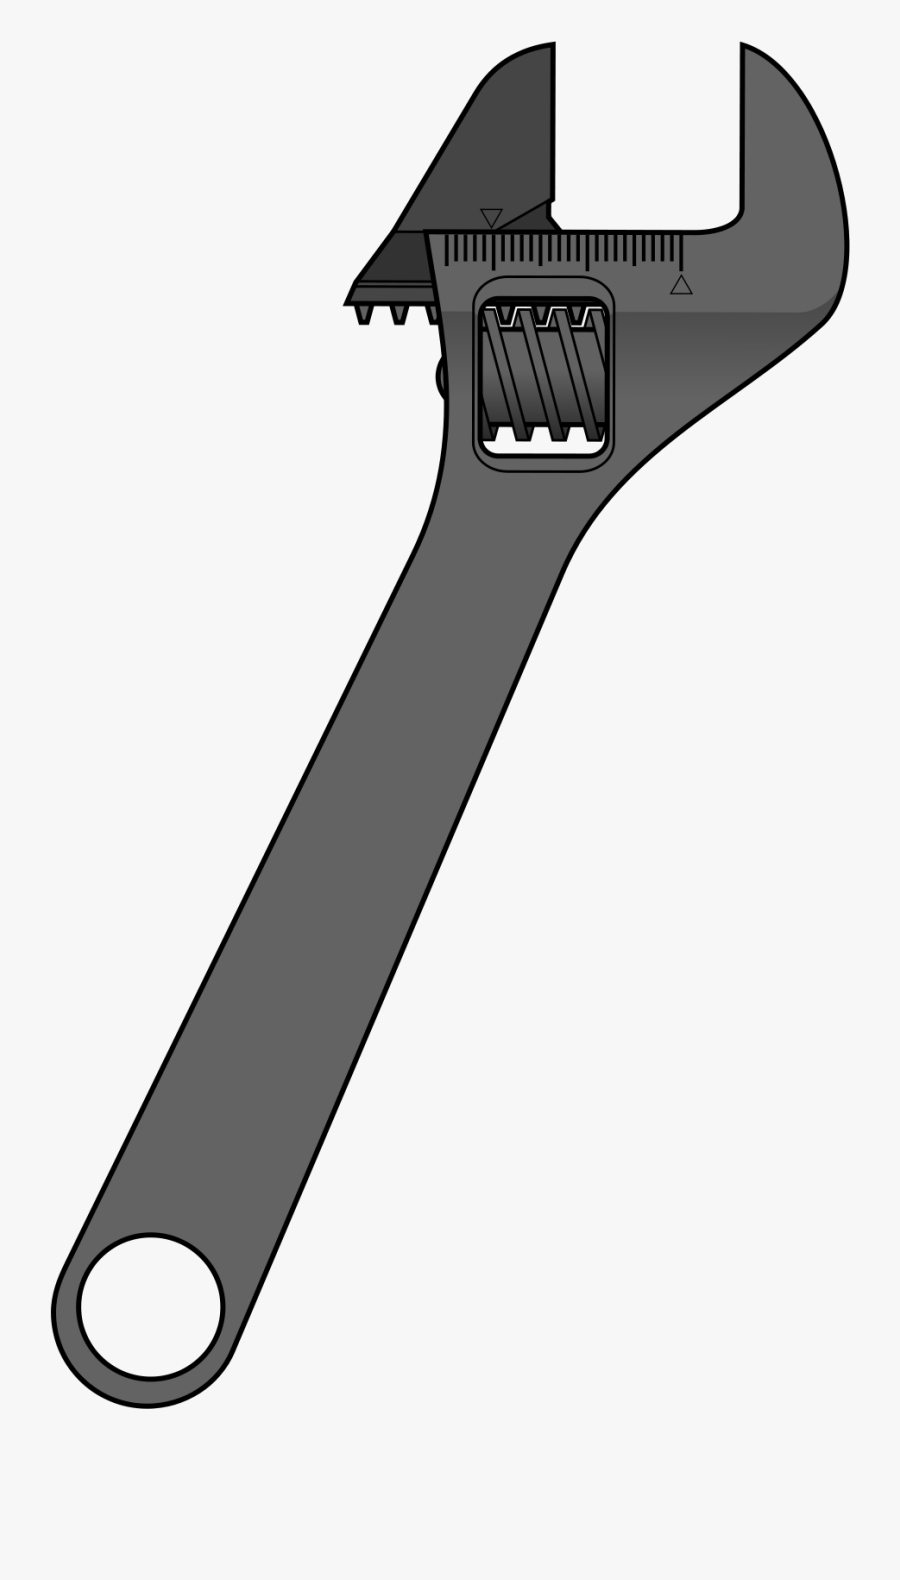 Adjustable Wrench - Adjustable Wrench Clipart, Transparent Clipart